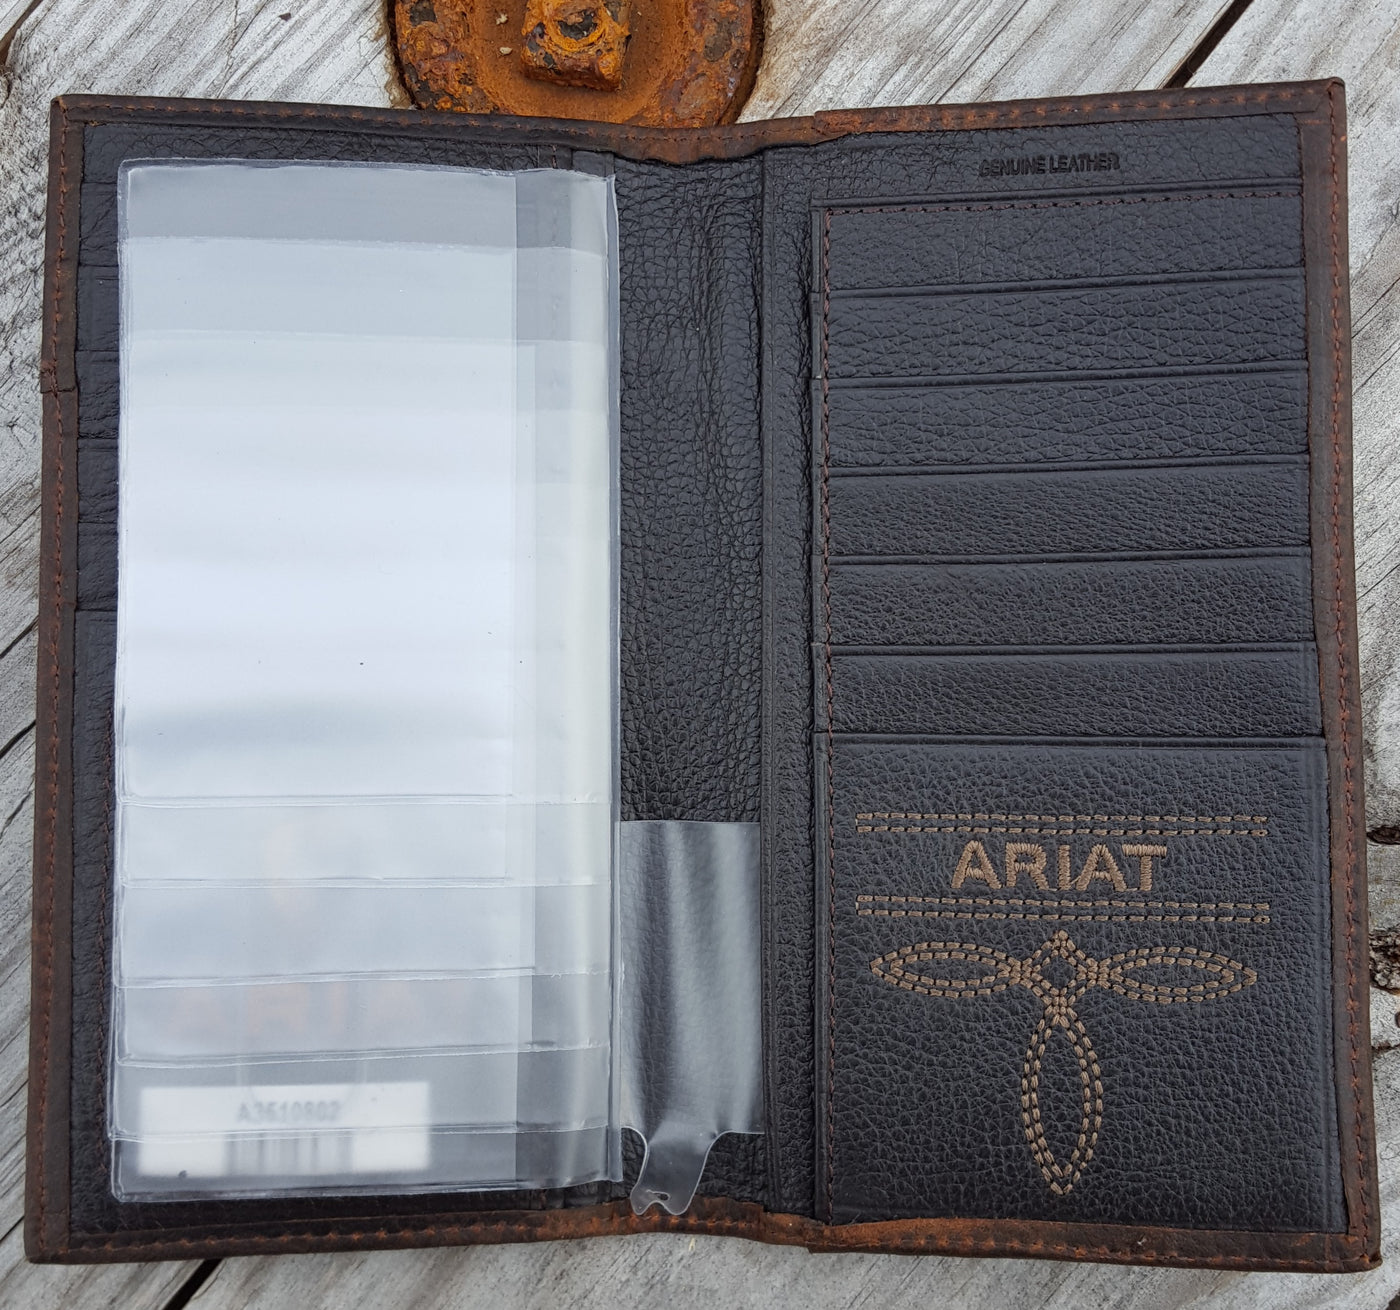 Ariat Rodeo Wallet with overlay, inside right view- Ariat Rodeo style wallet  Wallet is distressed brown leather with Ariat shield concho. Multiple credit card slots, clear drivers license slot and removable picture holder.  Folded wallet measures 7" tall by 3" wide. Interior has 12 card slots, one open cash pocket, and an identification window.